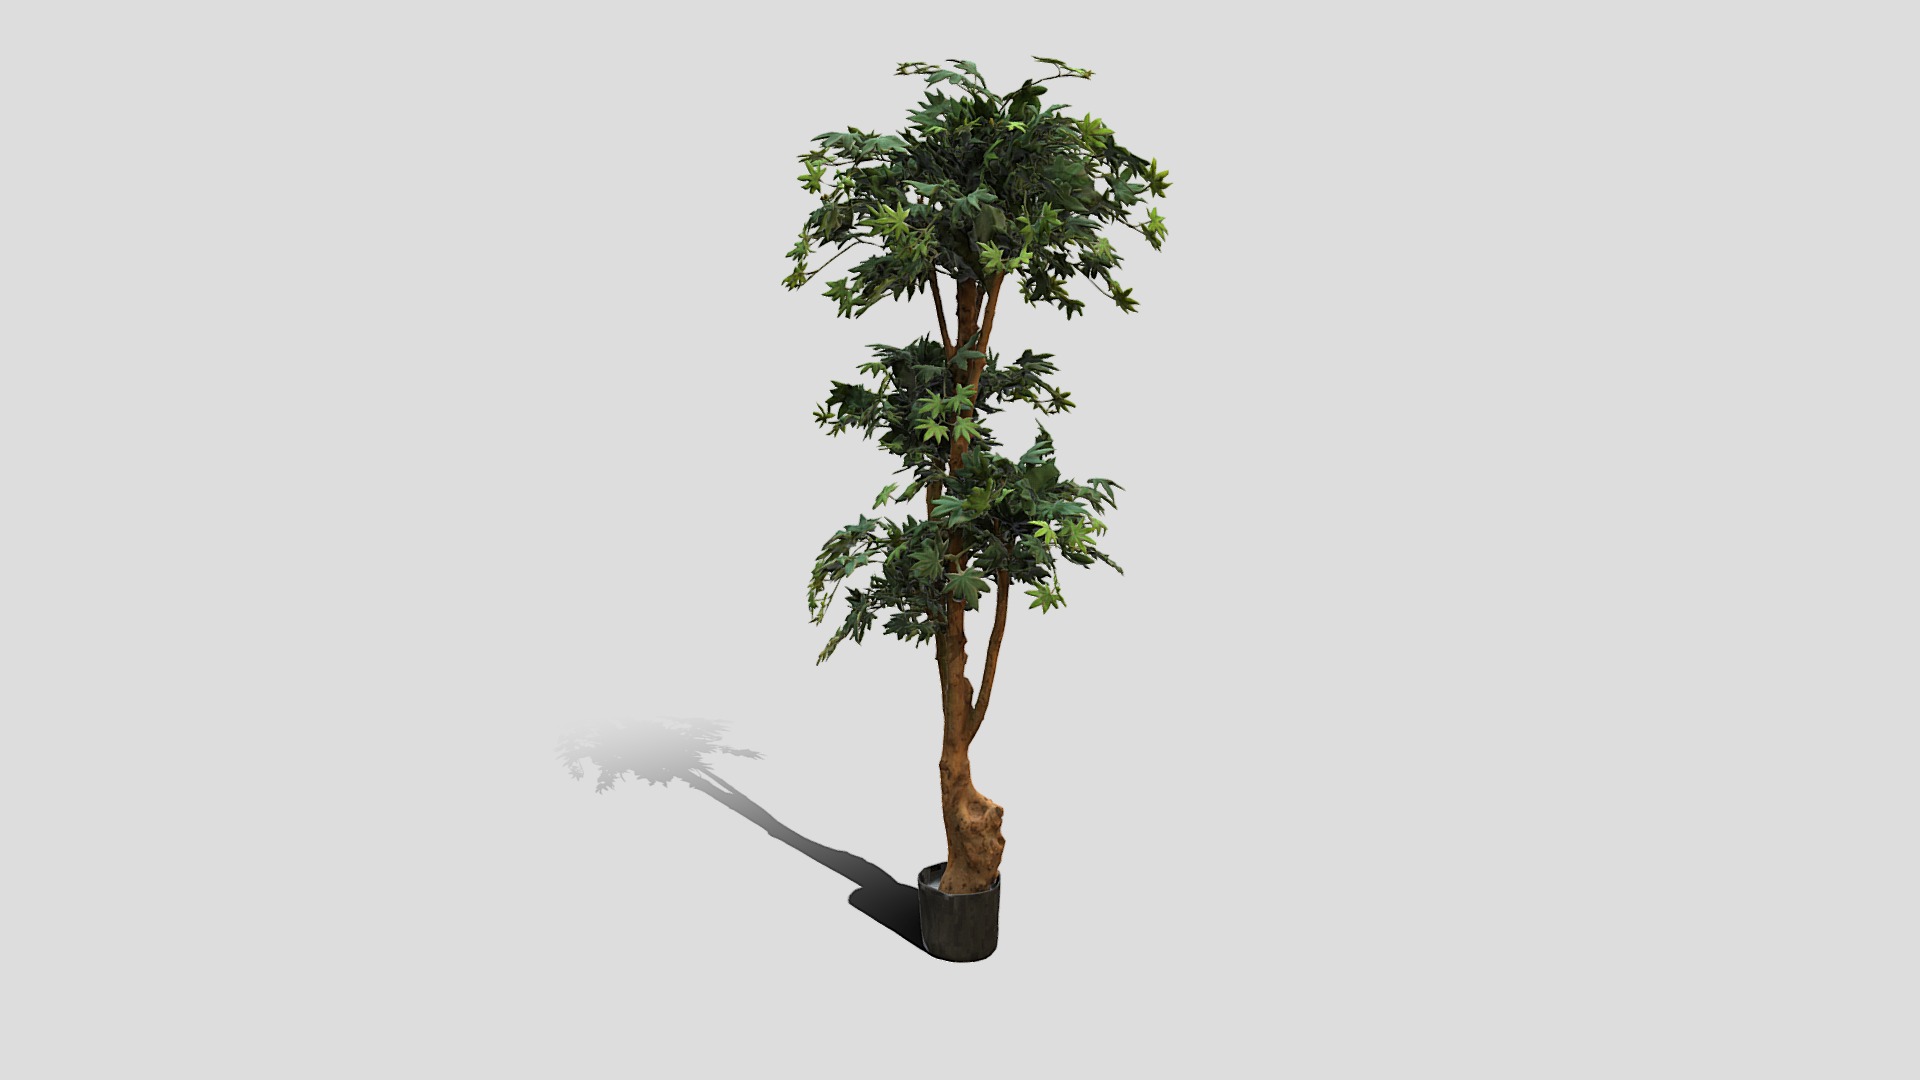 3D model 000003_153218 - This is a 3D model of the 000003_153218. The 3D model is about a tree with a stick.